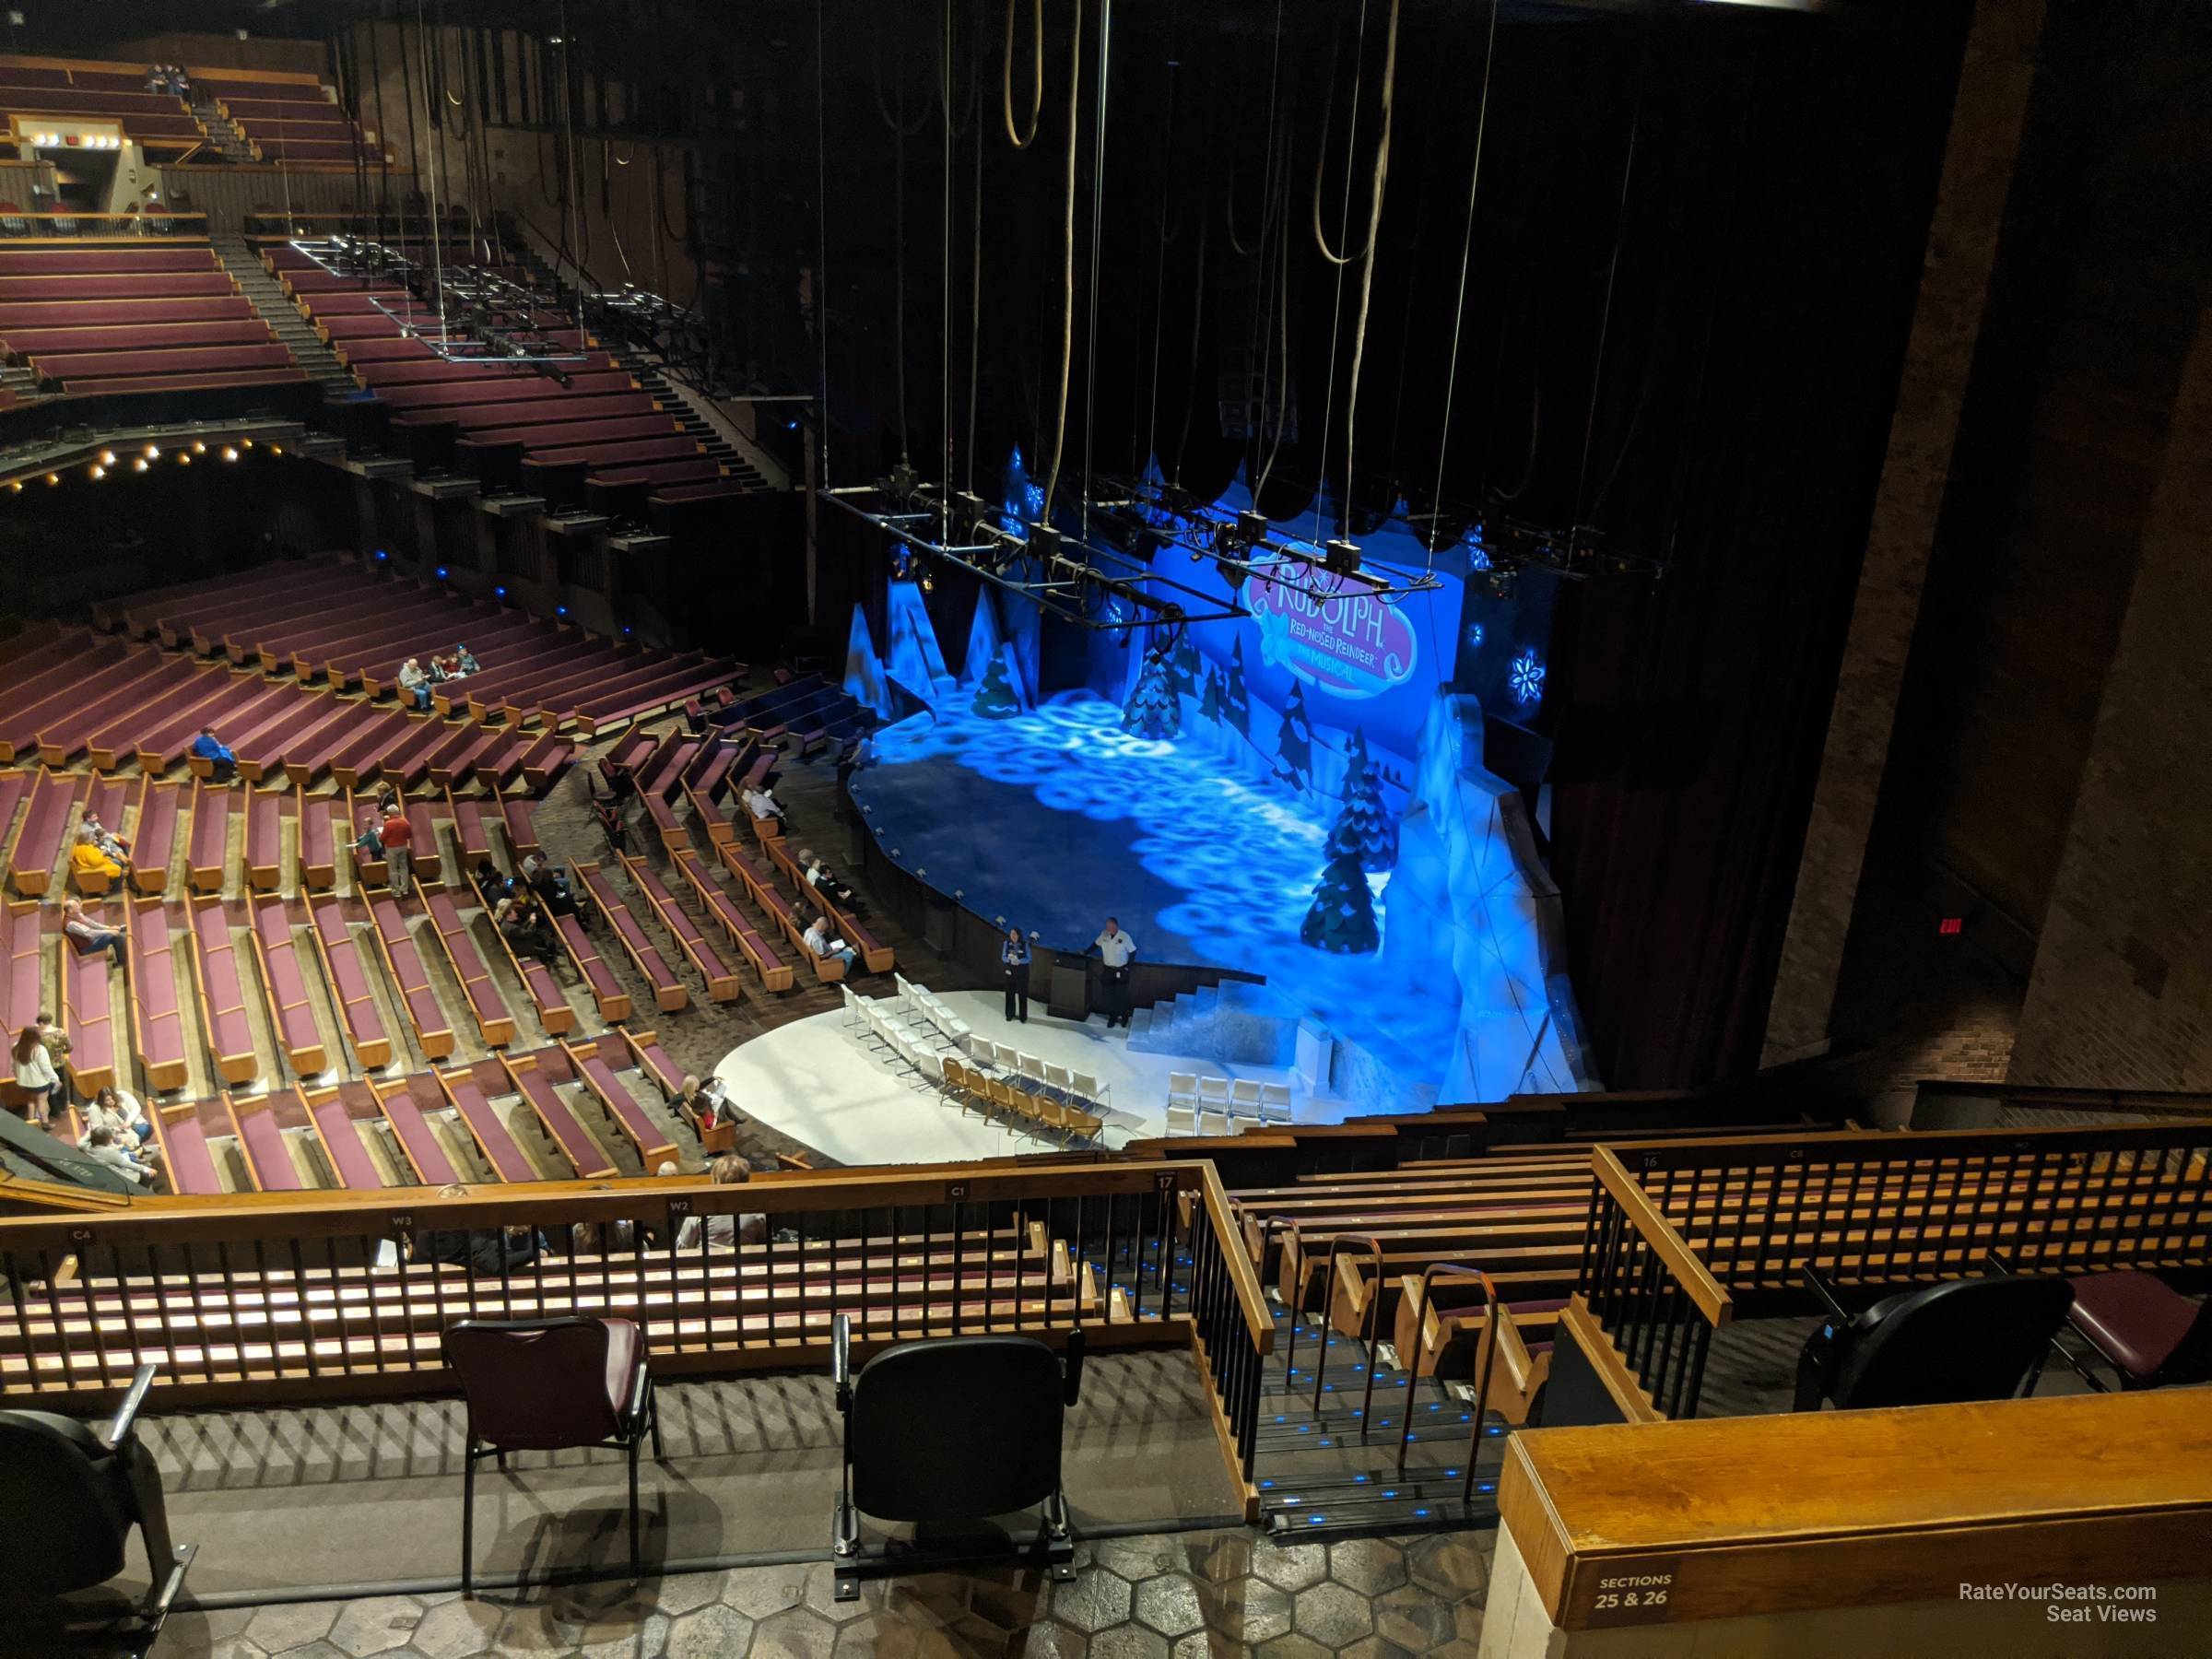 section 26, row k seat view  - grand ole opry house